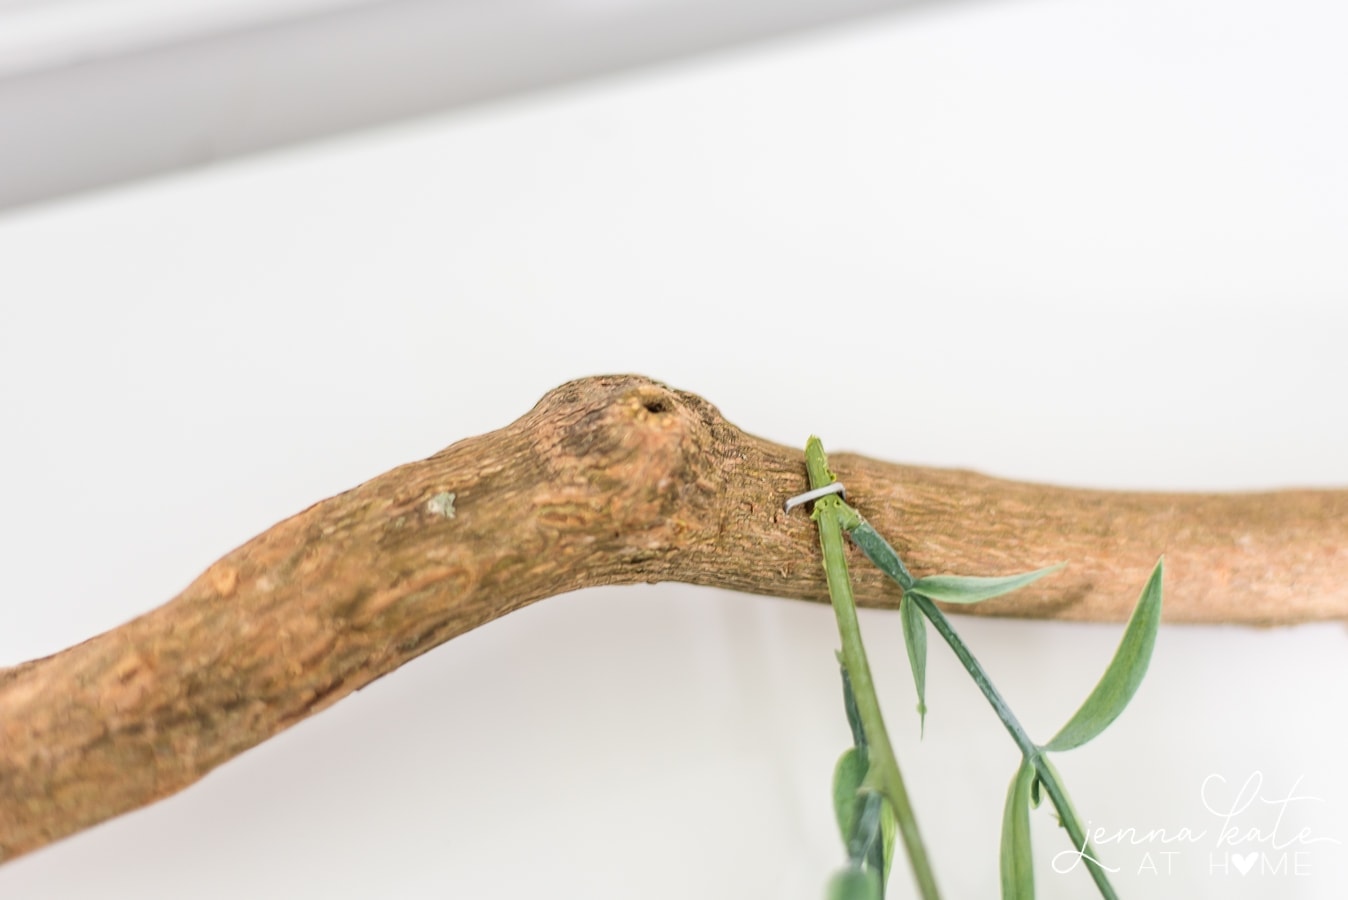 A close-up of the end of the clipped green garland seured to the branch with a heavy-duty staple